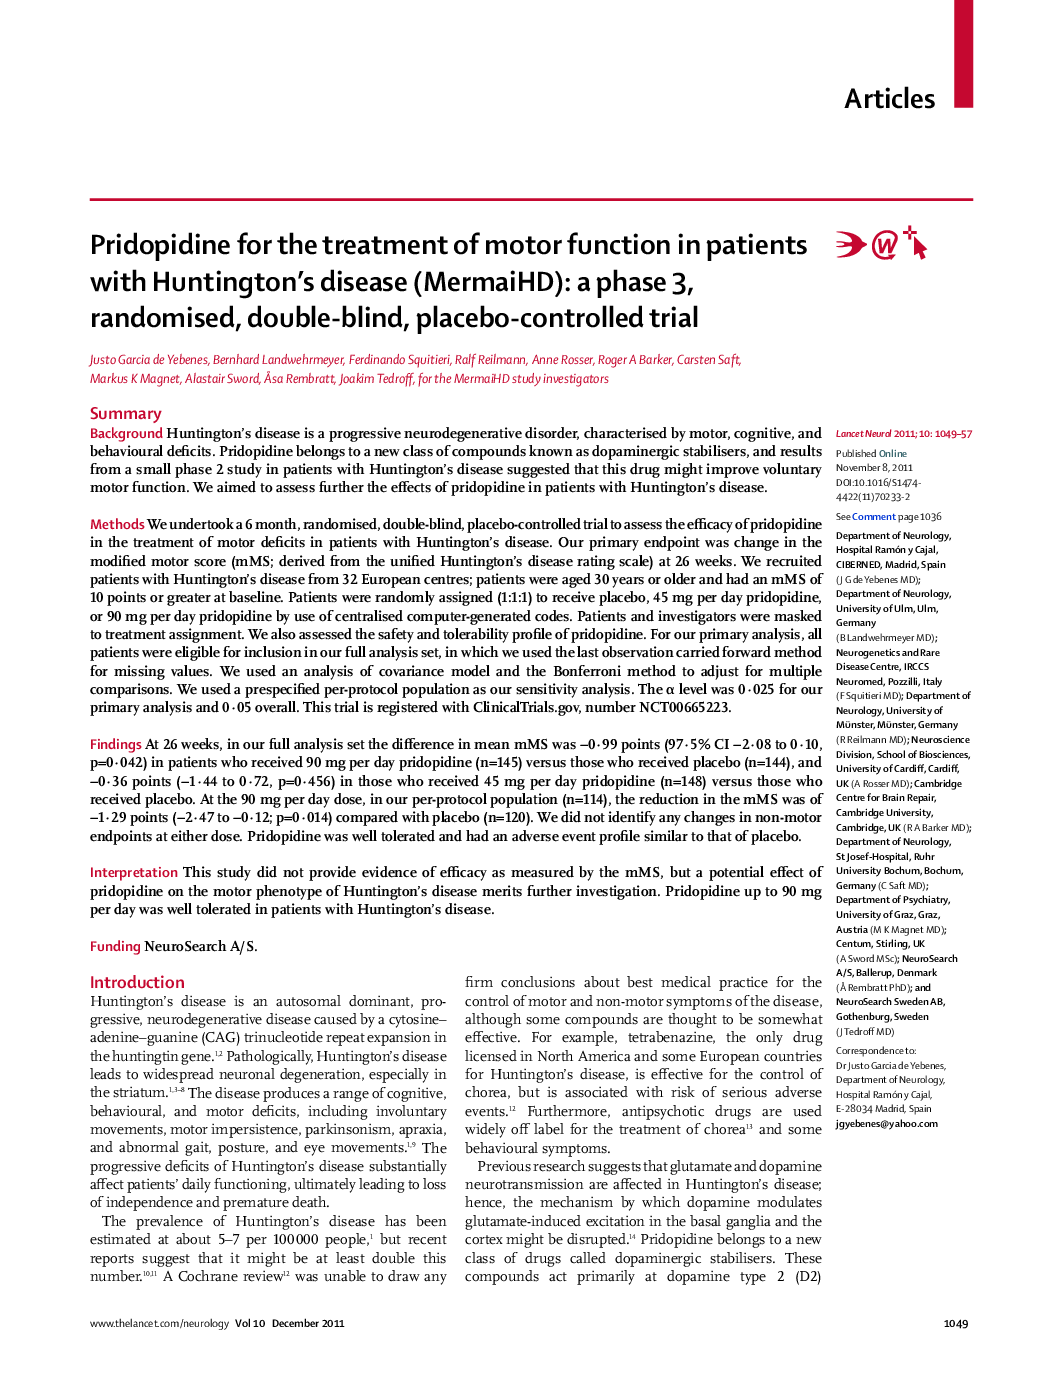 Pridopidine for the treatment of motor function in patients with Huntington's disease (MermaiHD): a phase 3, randomised, double-blind, placebo-controlled trial